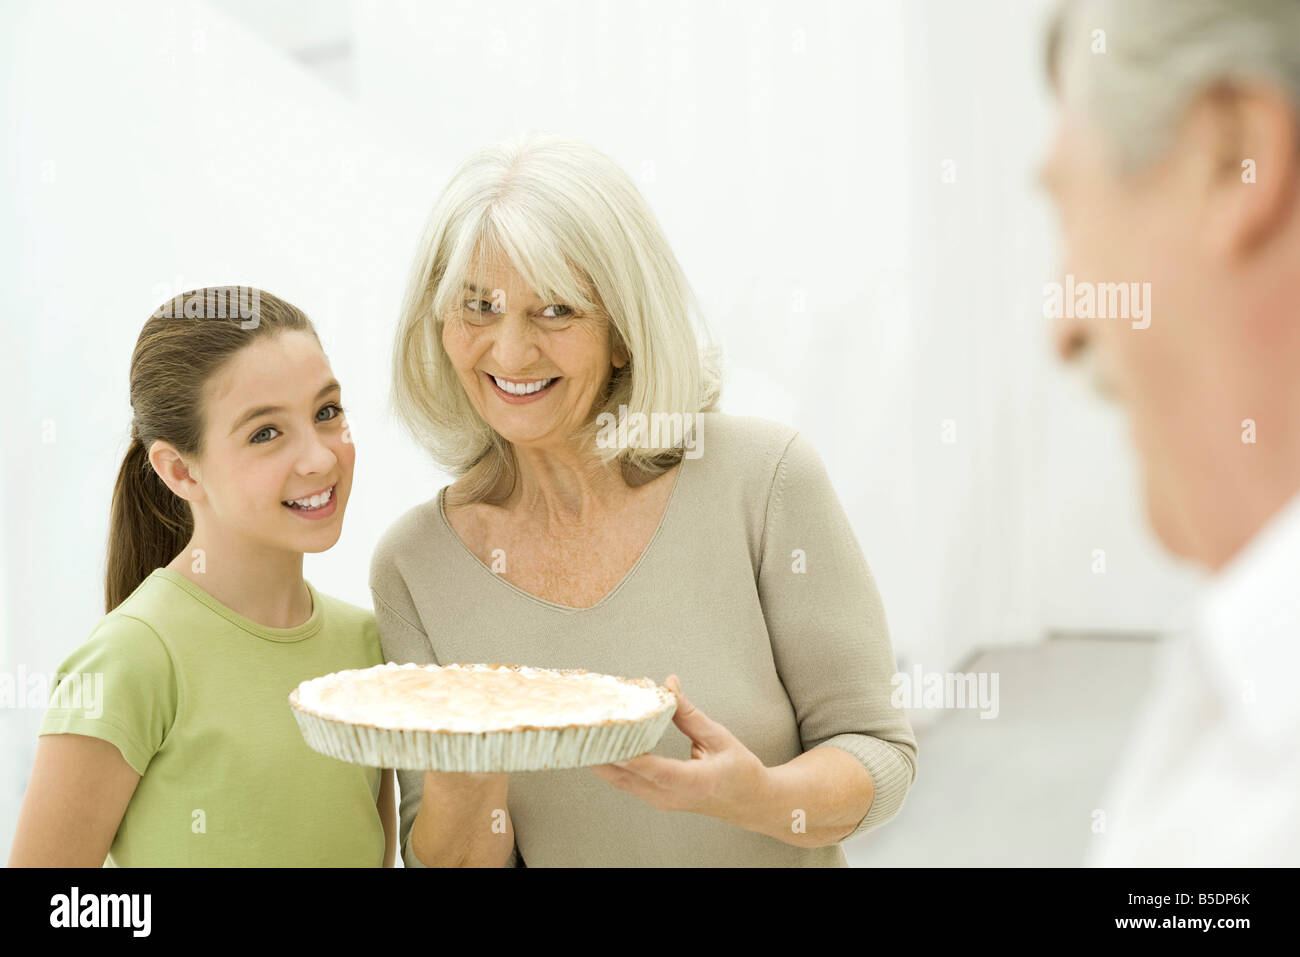 Grandmother and granddaughter side by side, senior woman holding pie Stock Photo